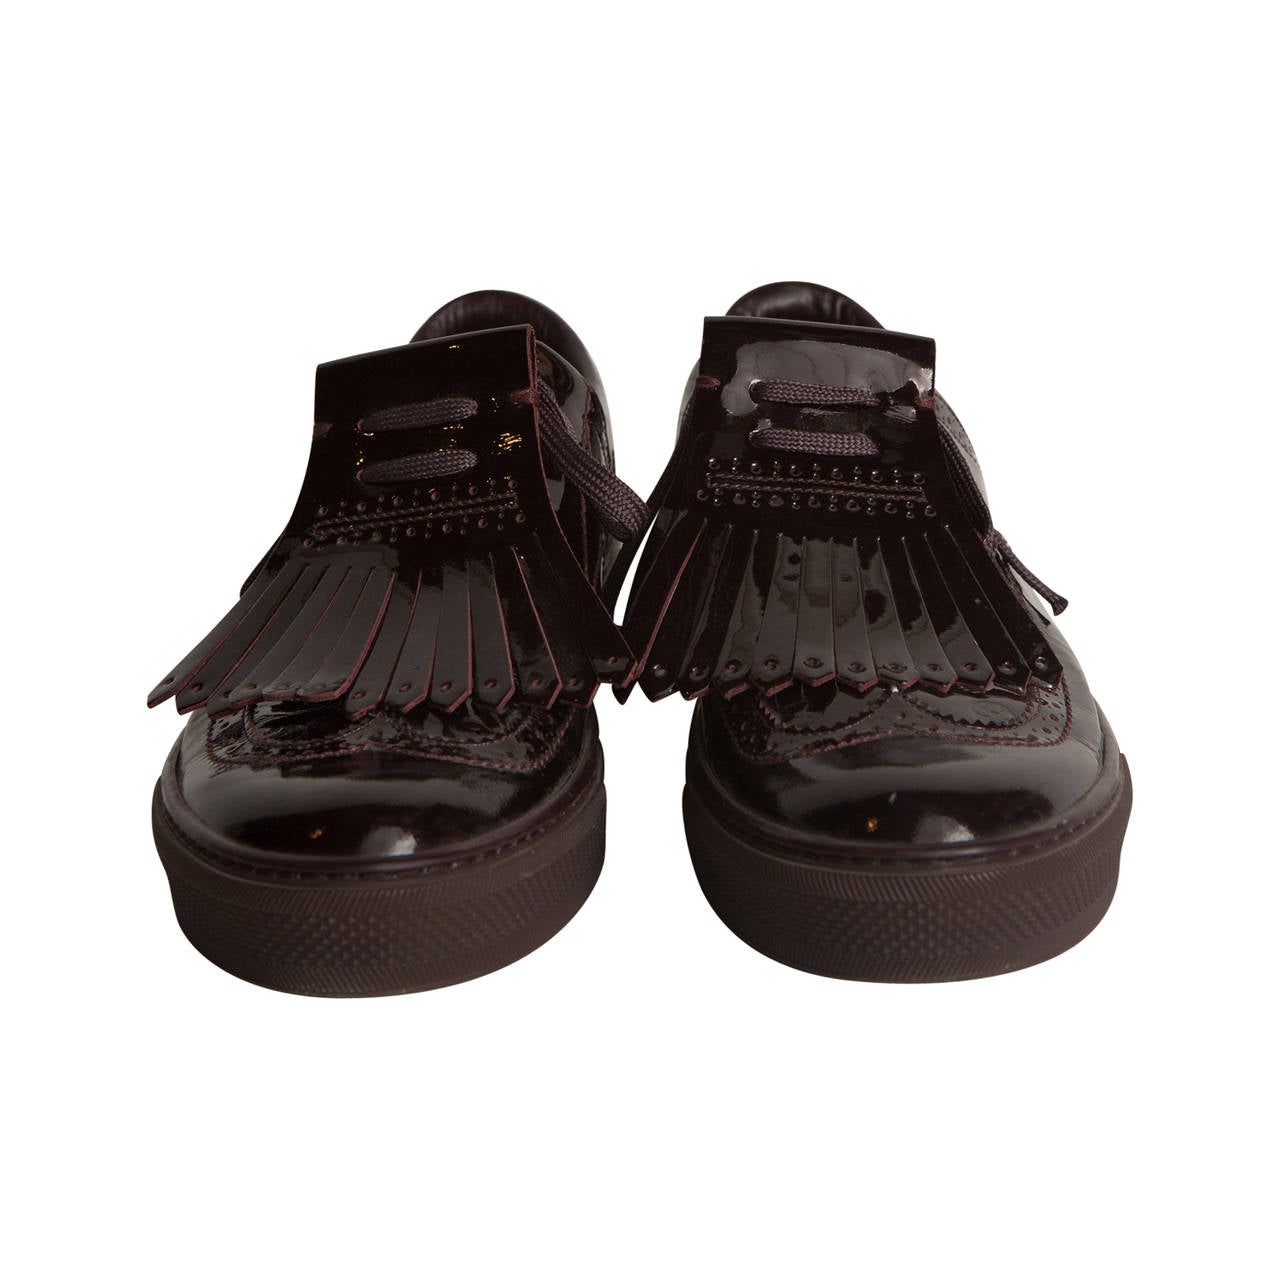 Louis Vuitton Chocolate Patent Leather Brogue Sneakers